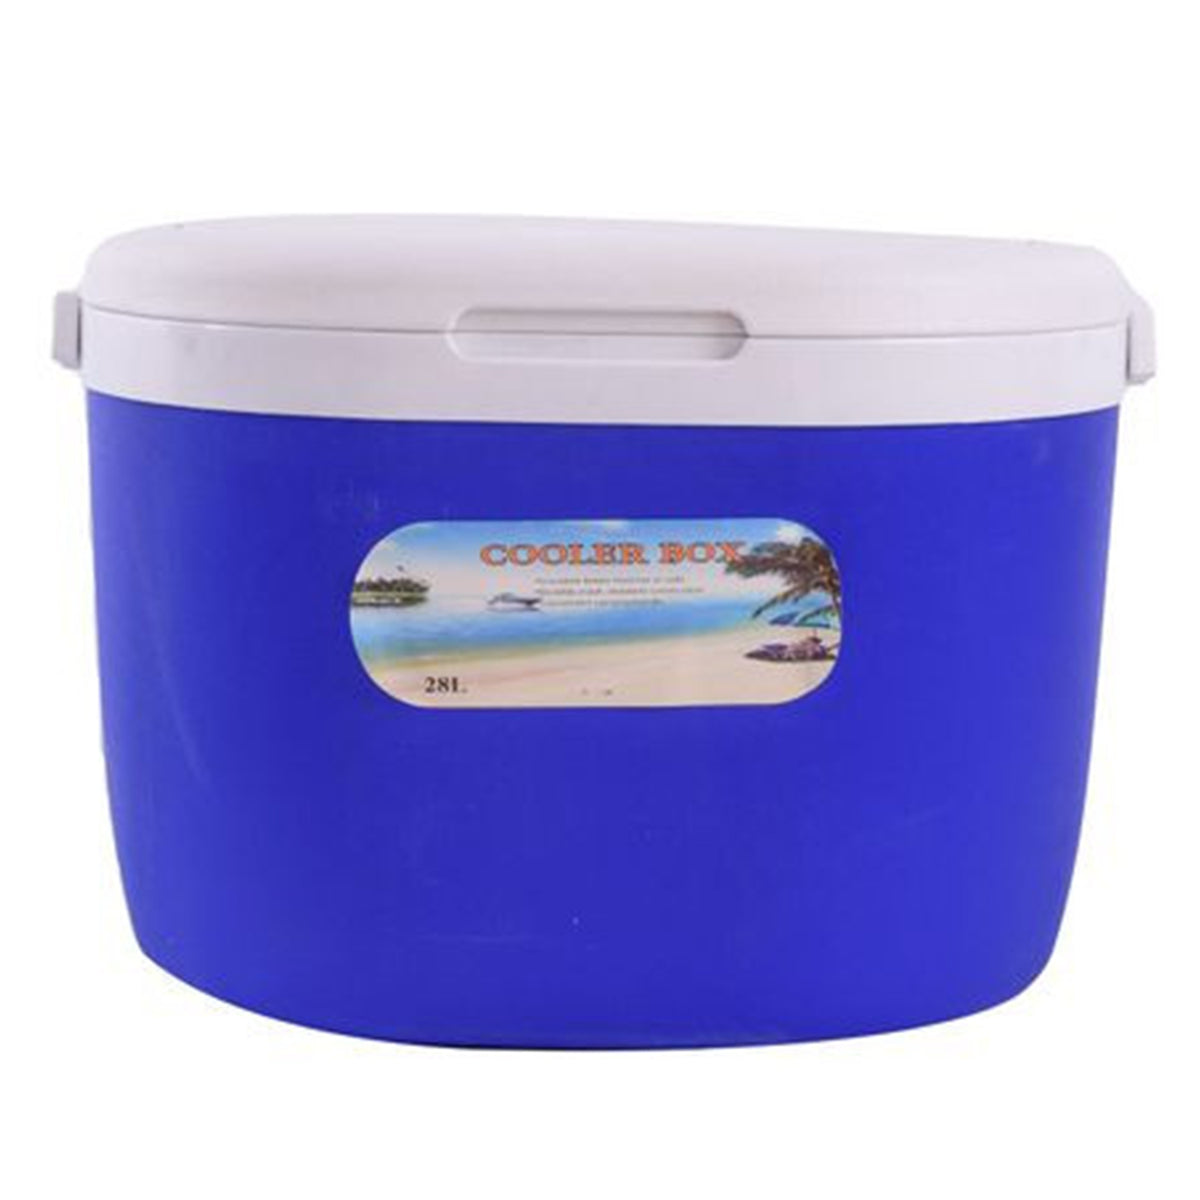 Cooler Box with lid - blue color